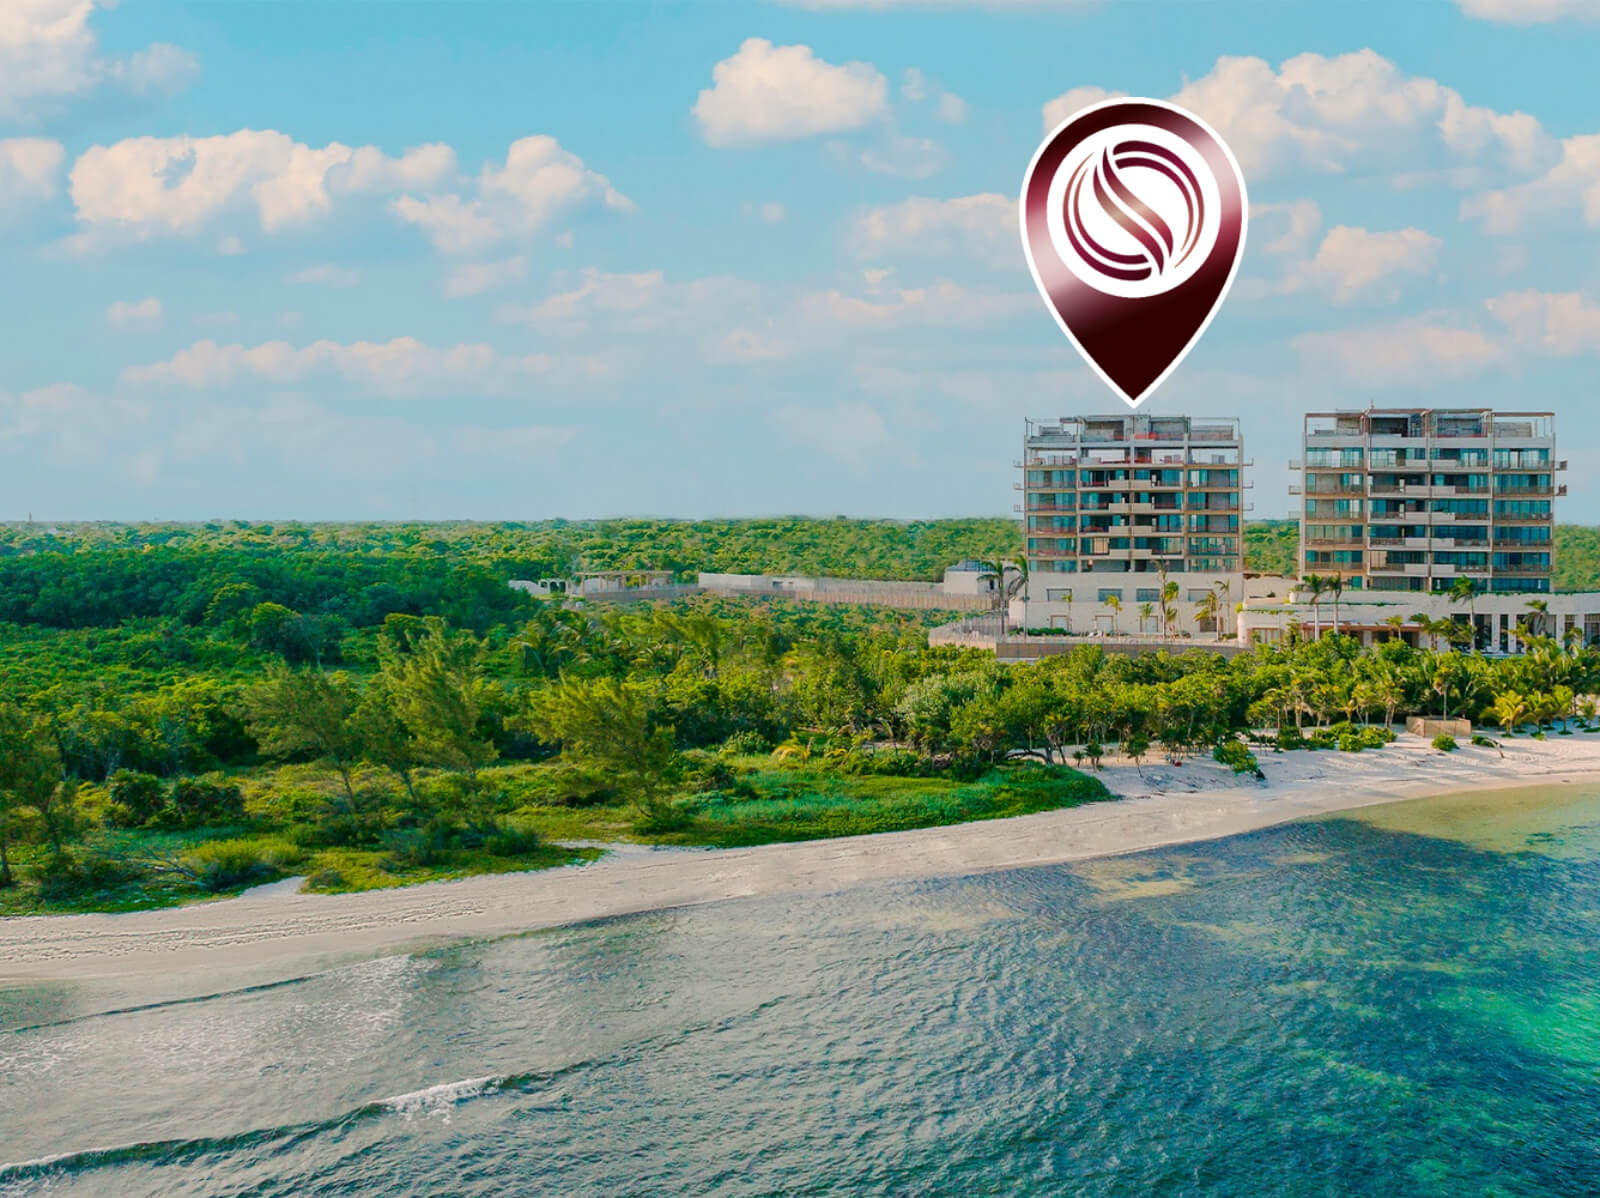 Oceanfront apartment with private pool, 842 m2, luxury condo with amenities, pre-construction, for sale Corasol Playa del Carmen